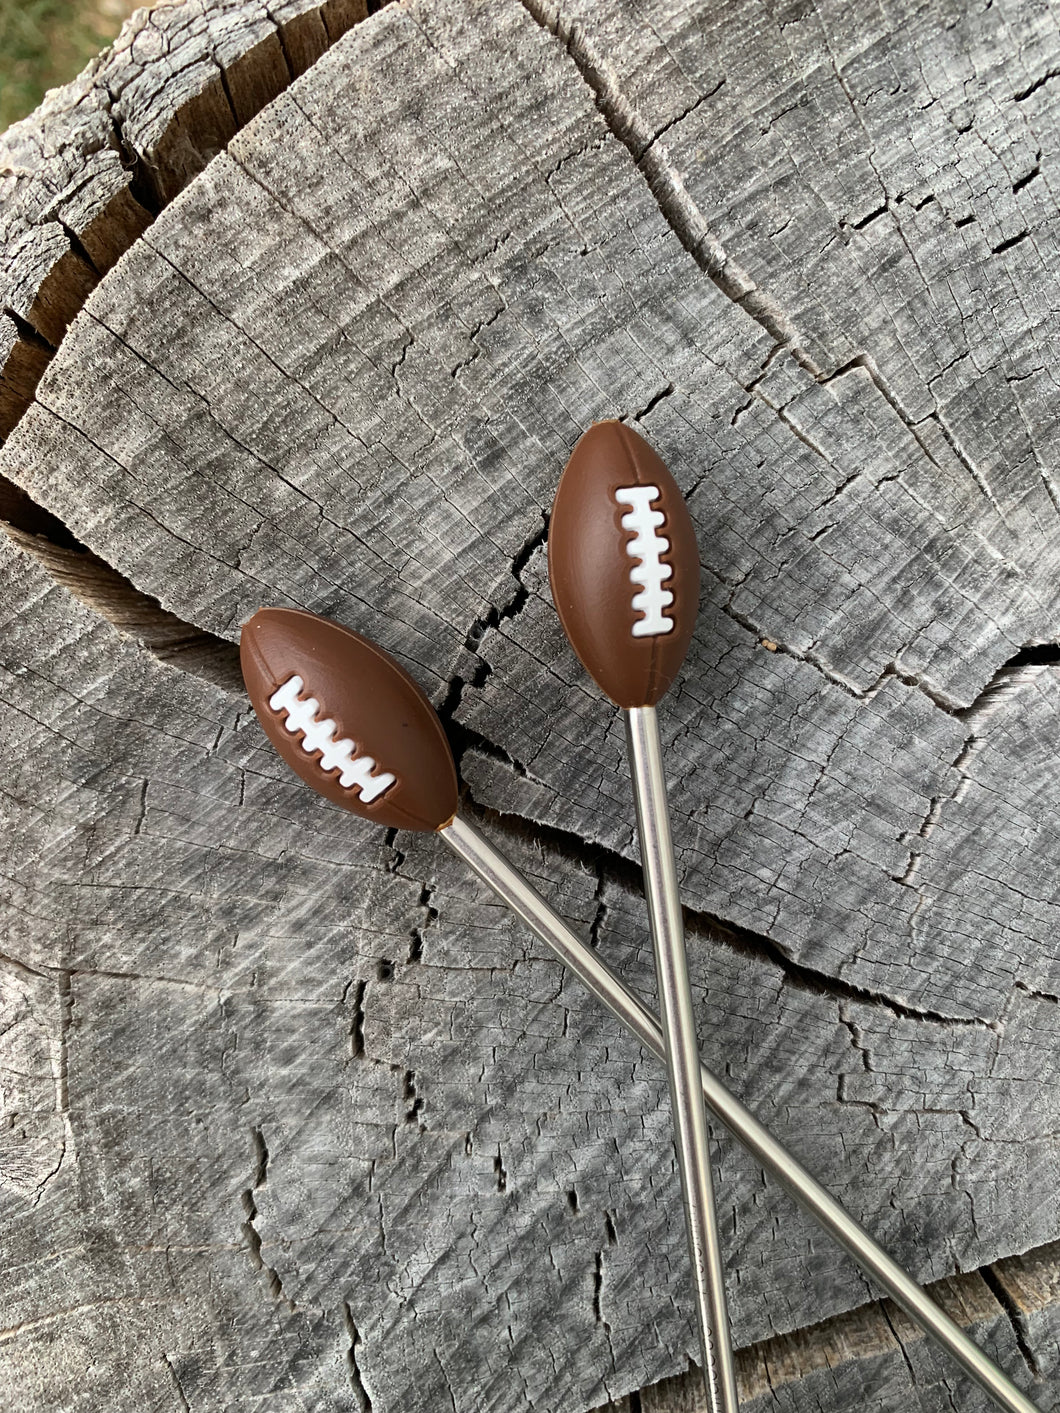 Football Stitch Stoppers